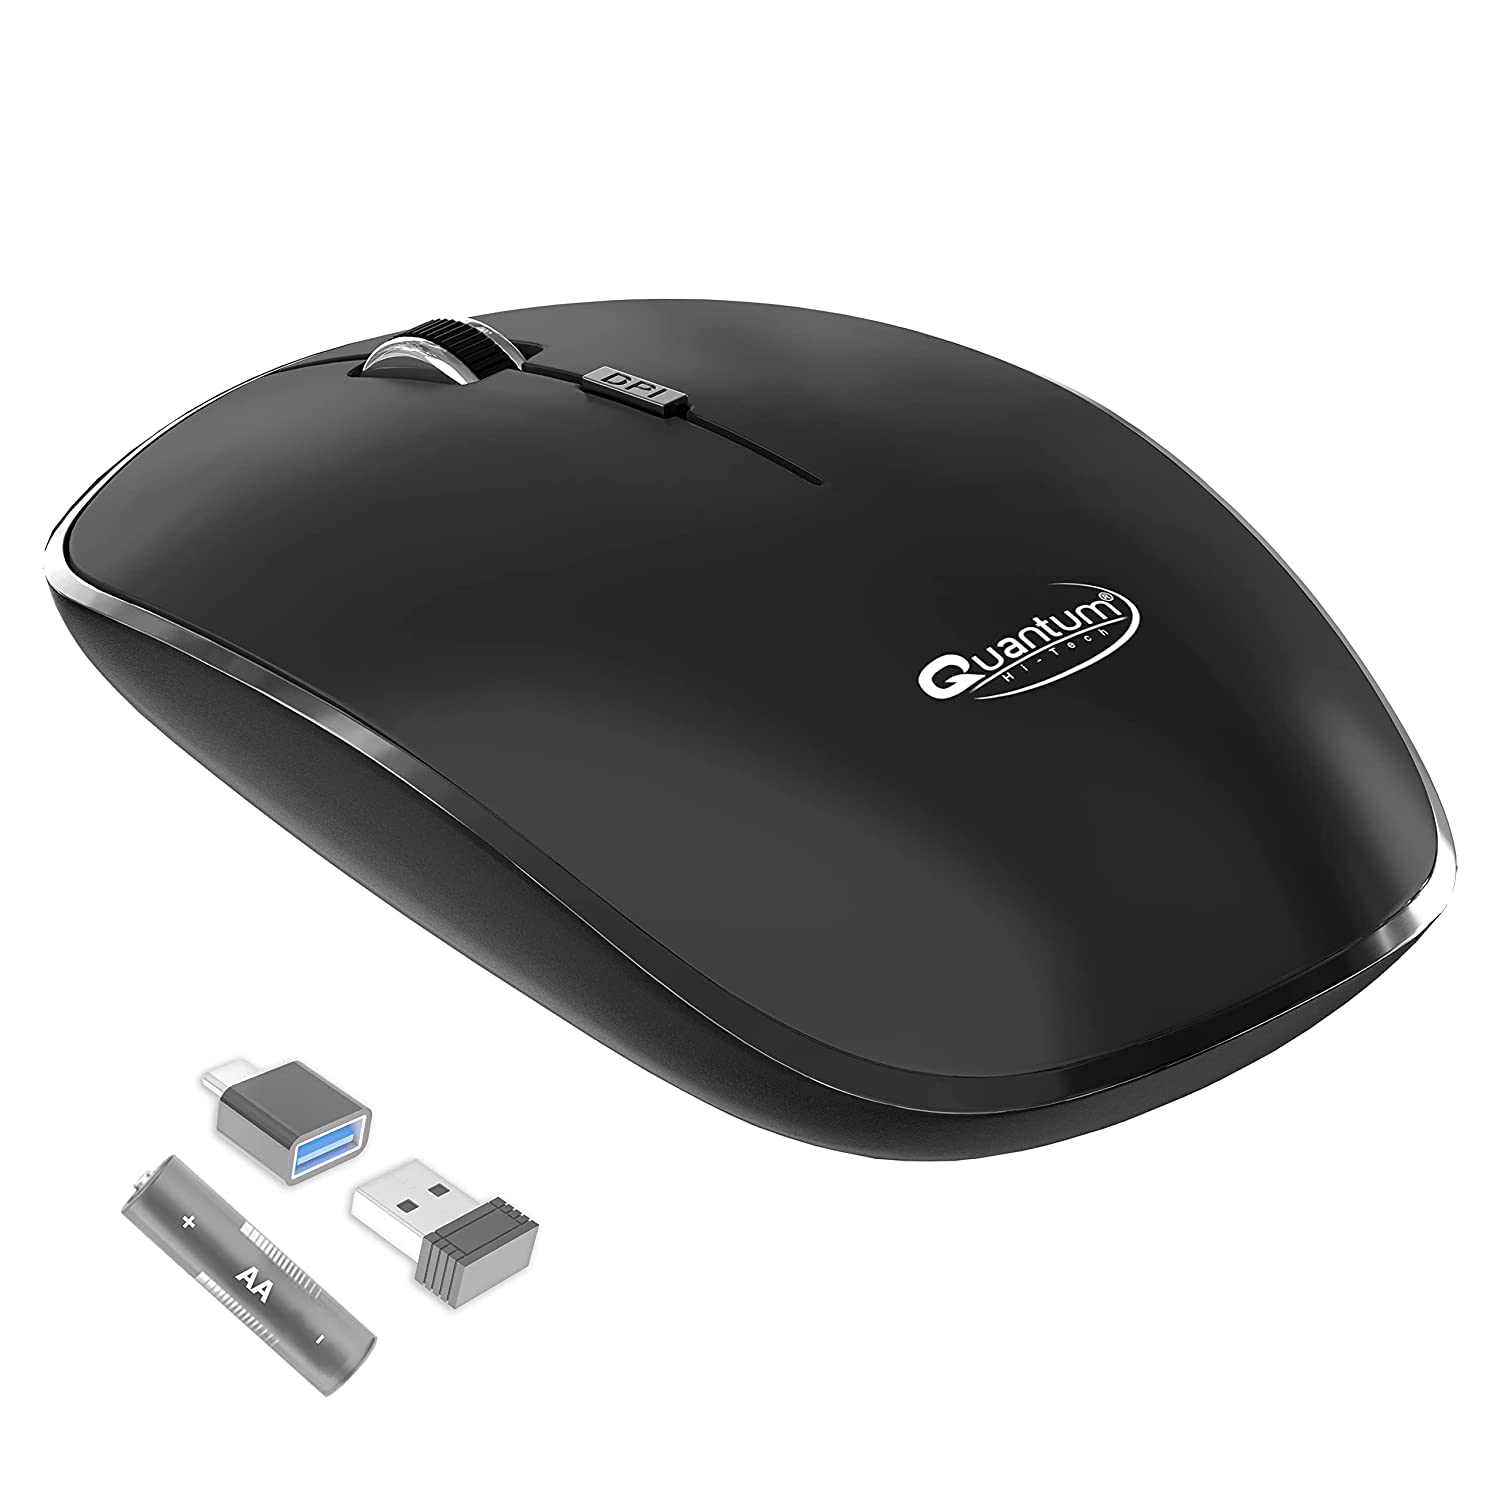 3rd wireless mouse under 500